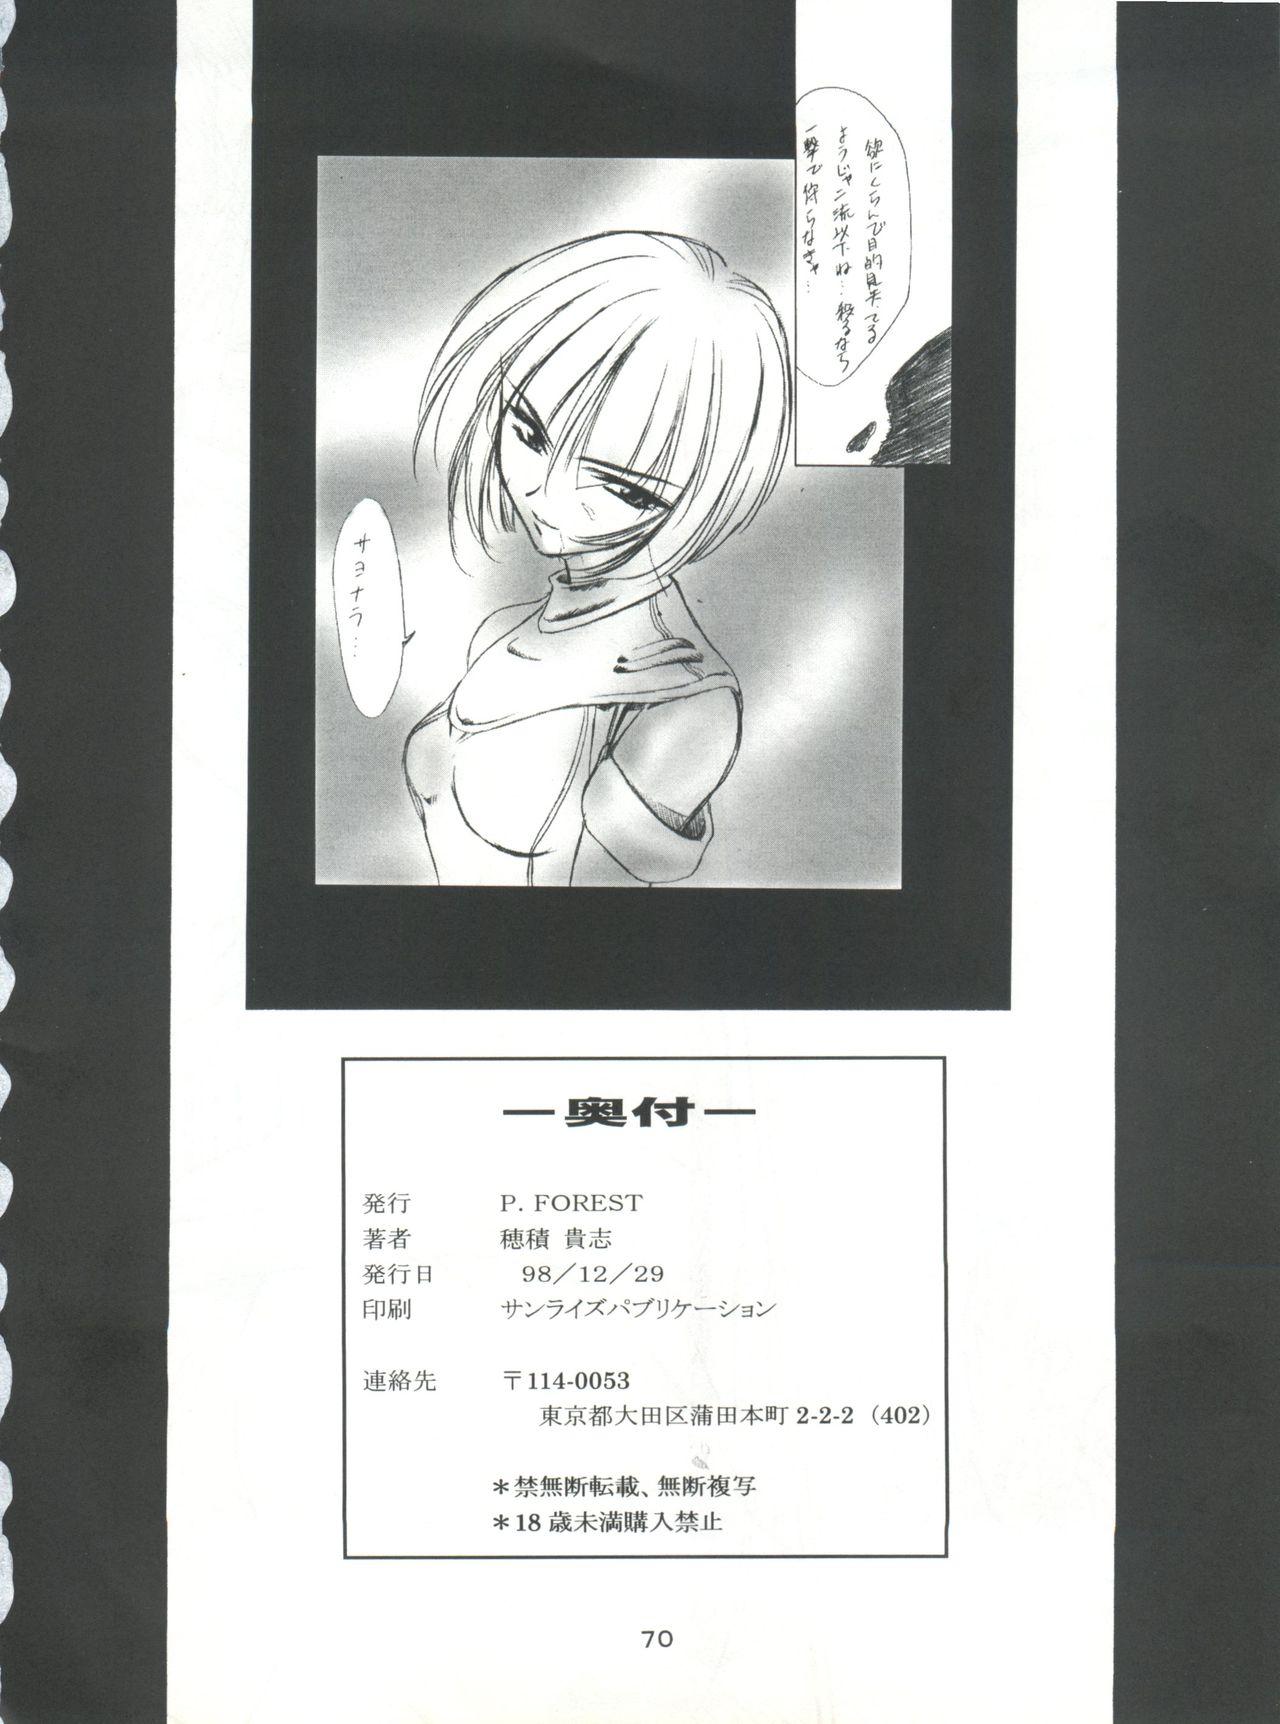 Vibrator Boys and Girls - White album Kare kano Missionary - Page 70